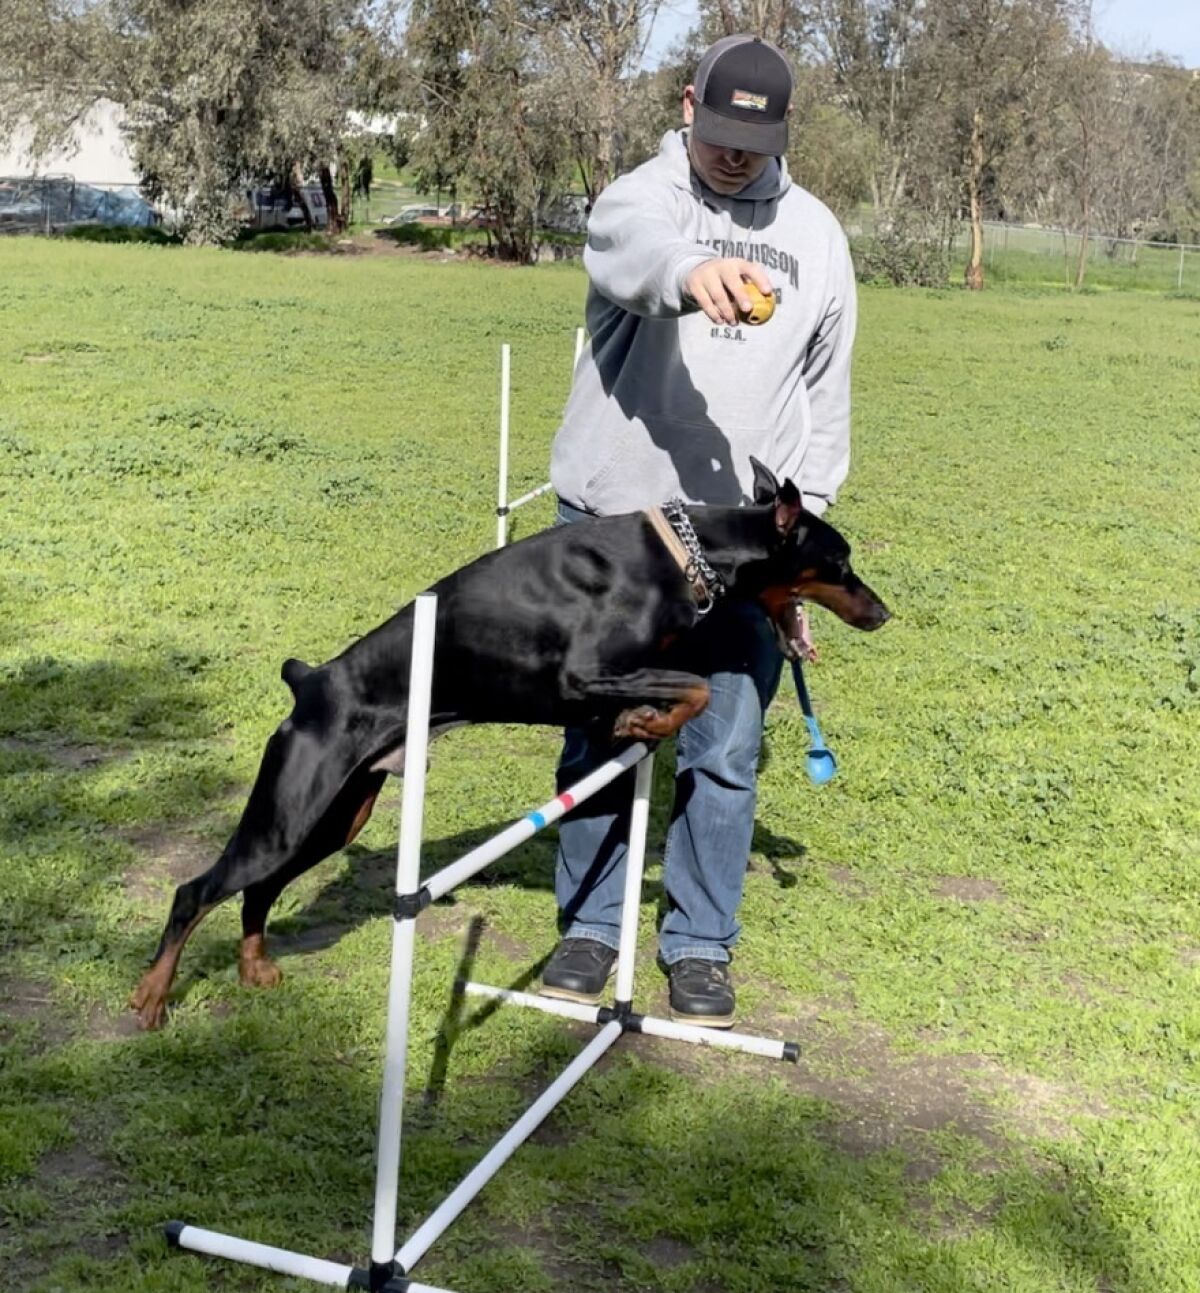 Danny Marinshaw helps his dog exercise at the 3-acre dog park in Ramona.